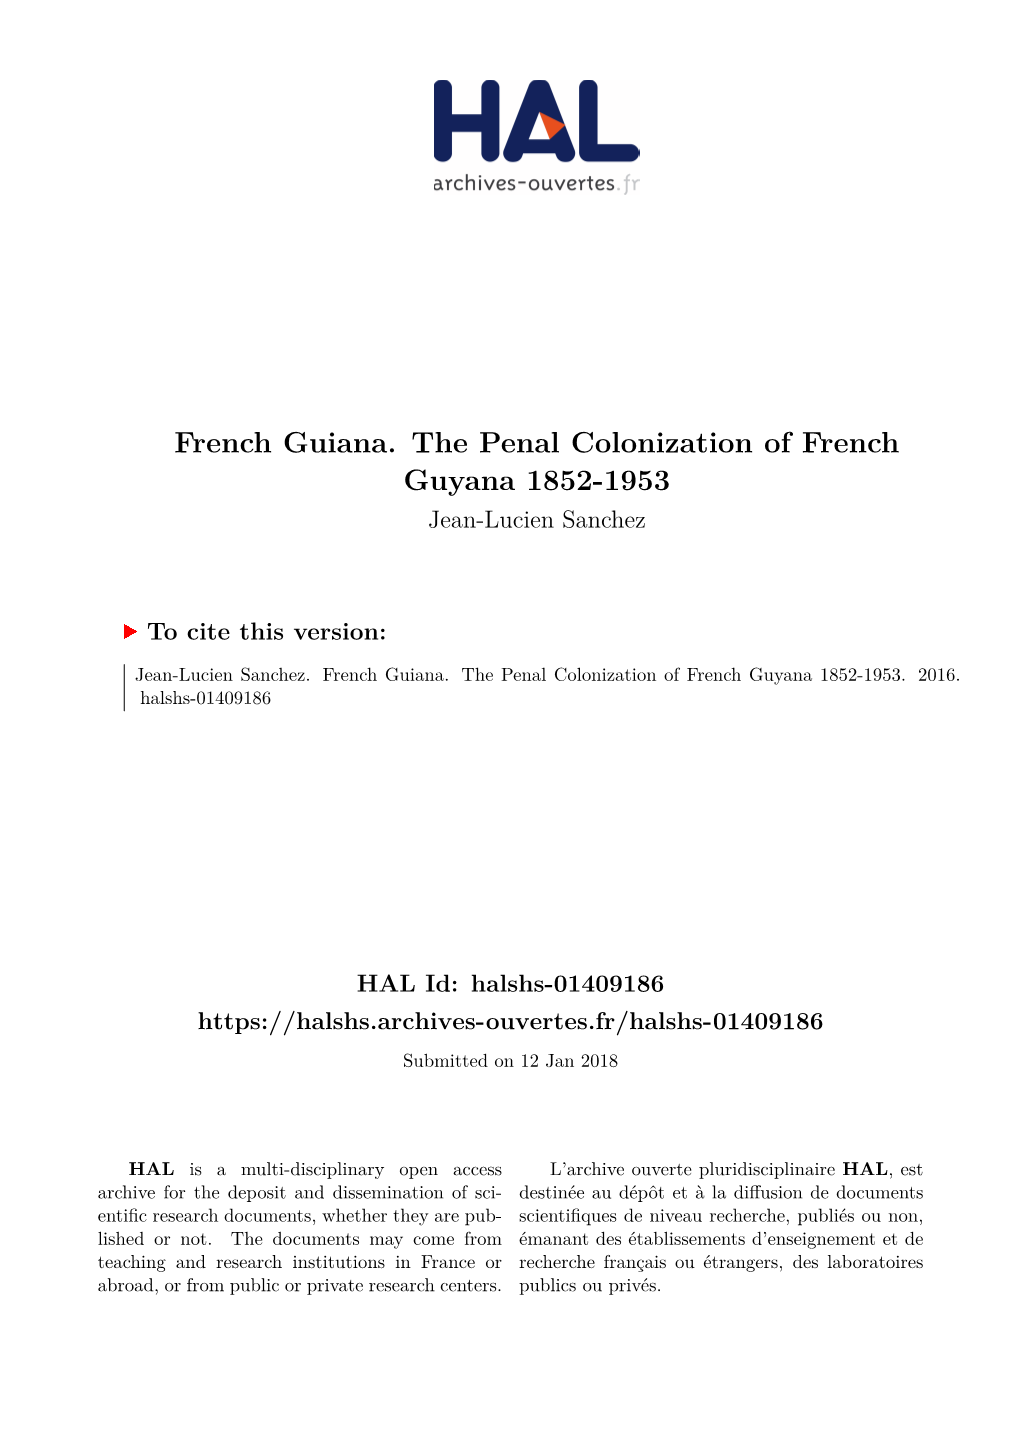 French Guiana. the Penal Colonization of French Guyana 1852-1953 Jean-Lucien Sanchez